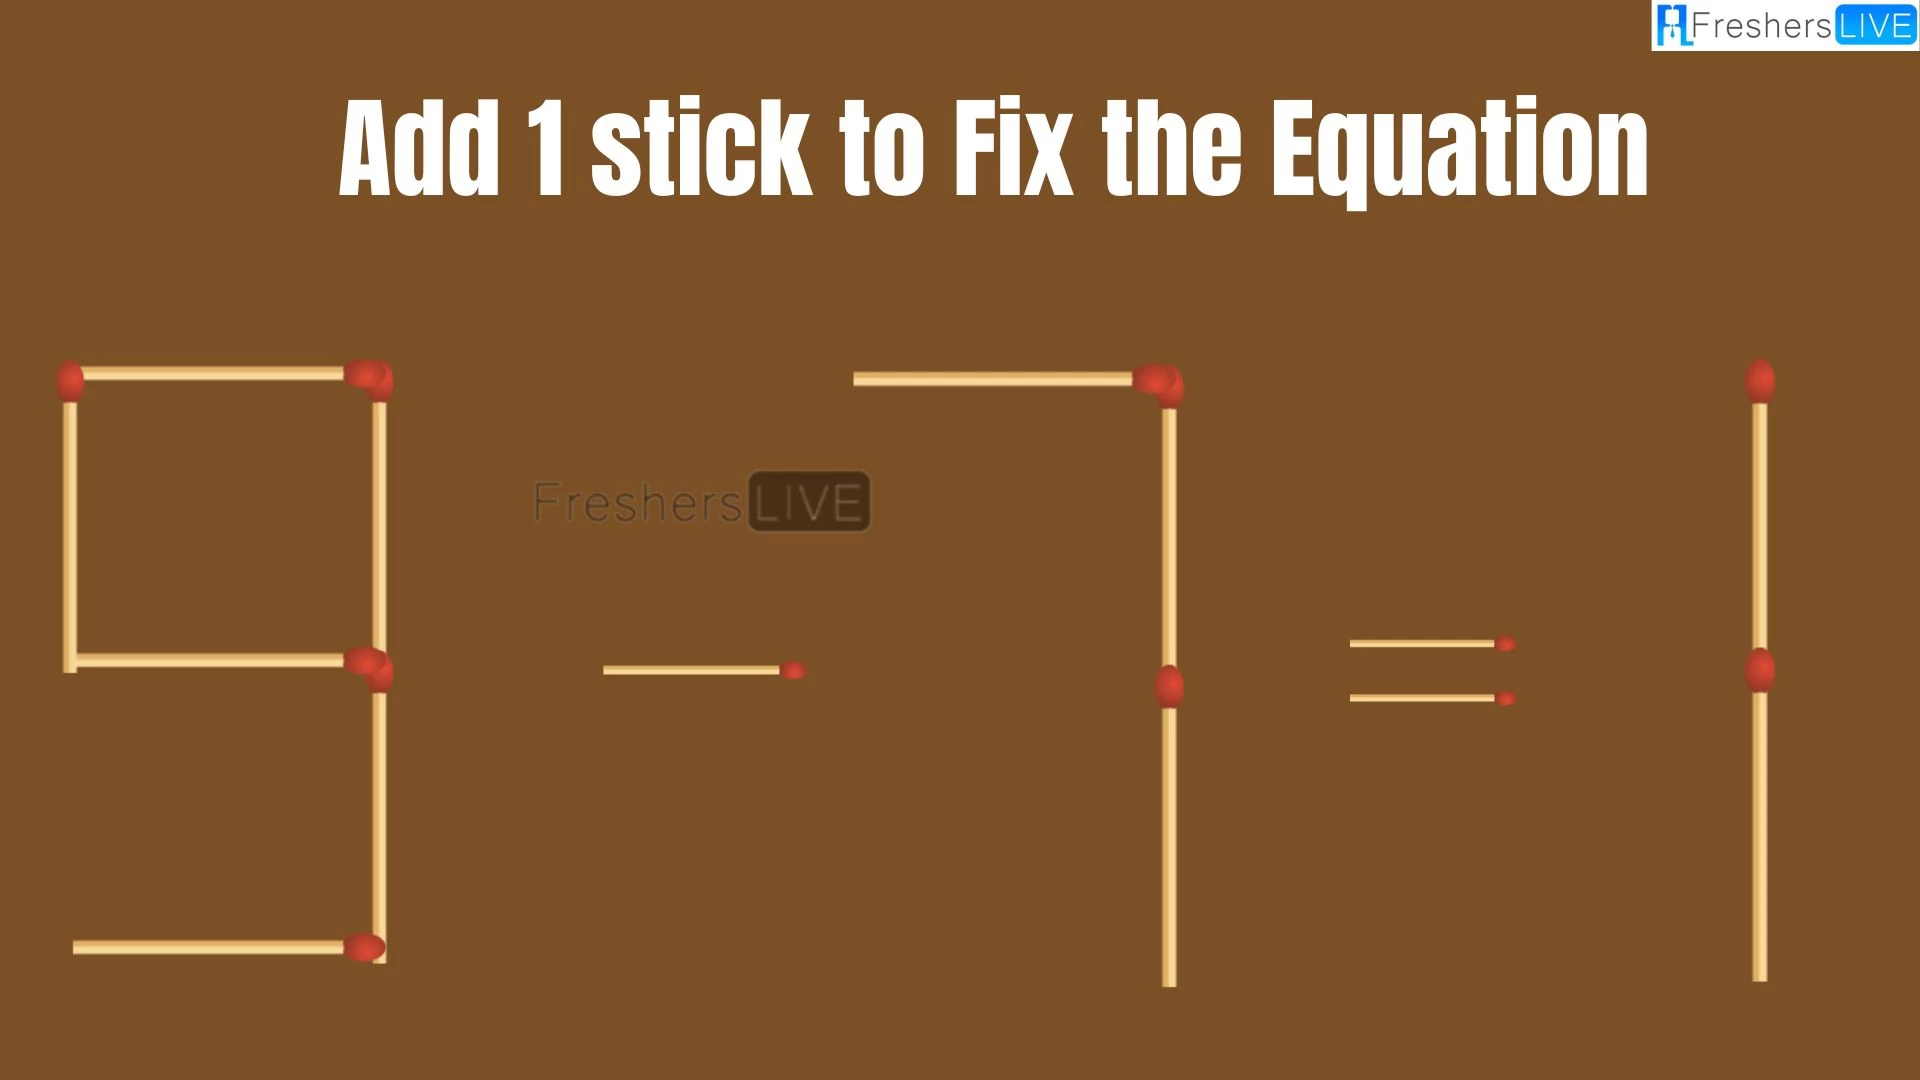 Solve the Puzzle to Transform 9-7=1 by Adding 1 Matchstick to Correct the Equation